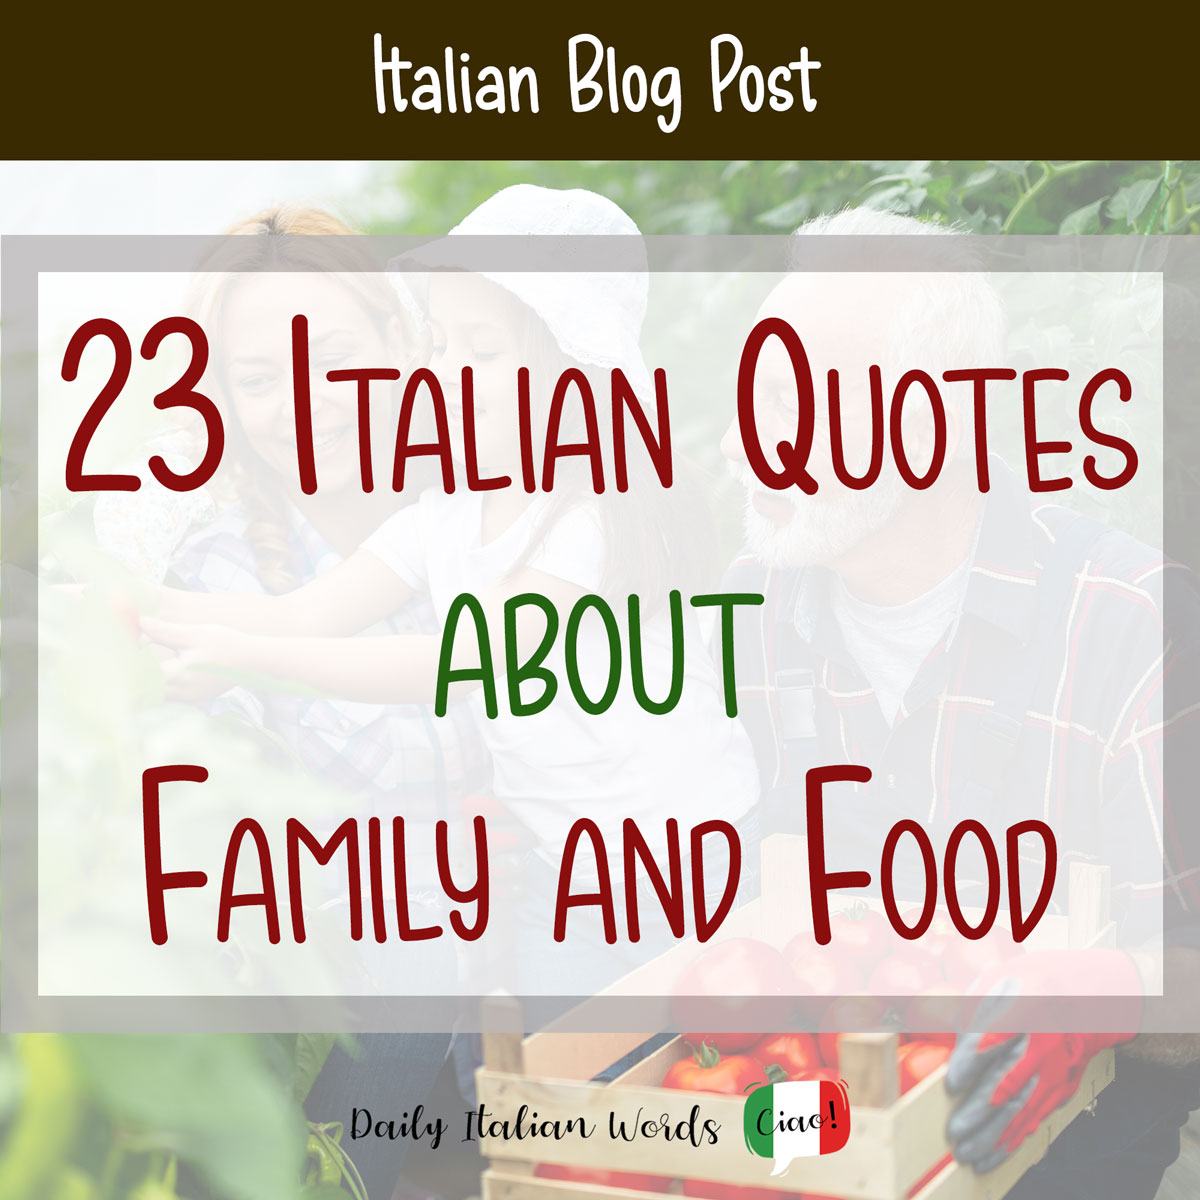 23 Italian Quotes and Expressions About Family and Food - Story Telling Co